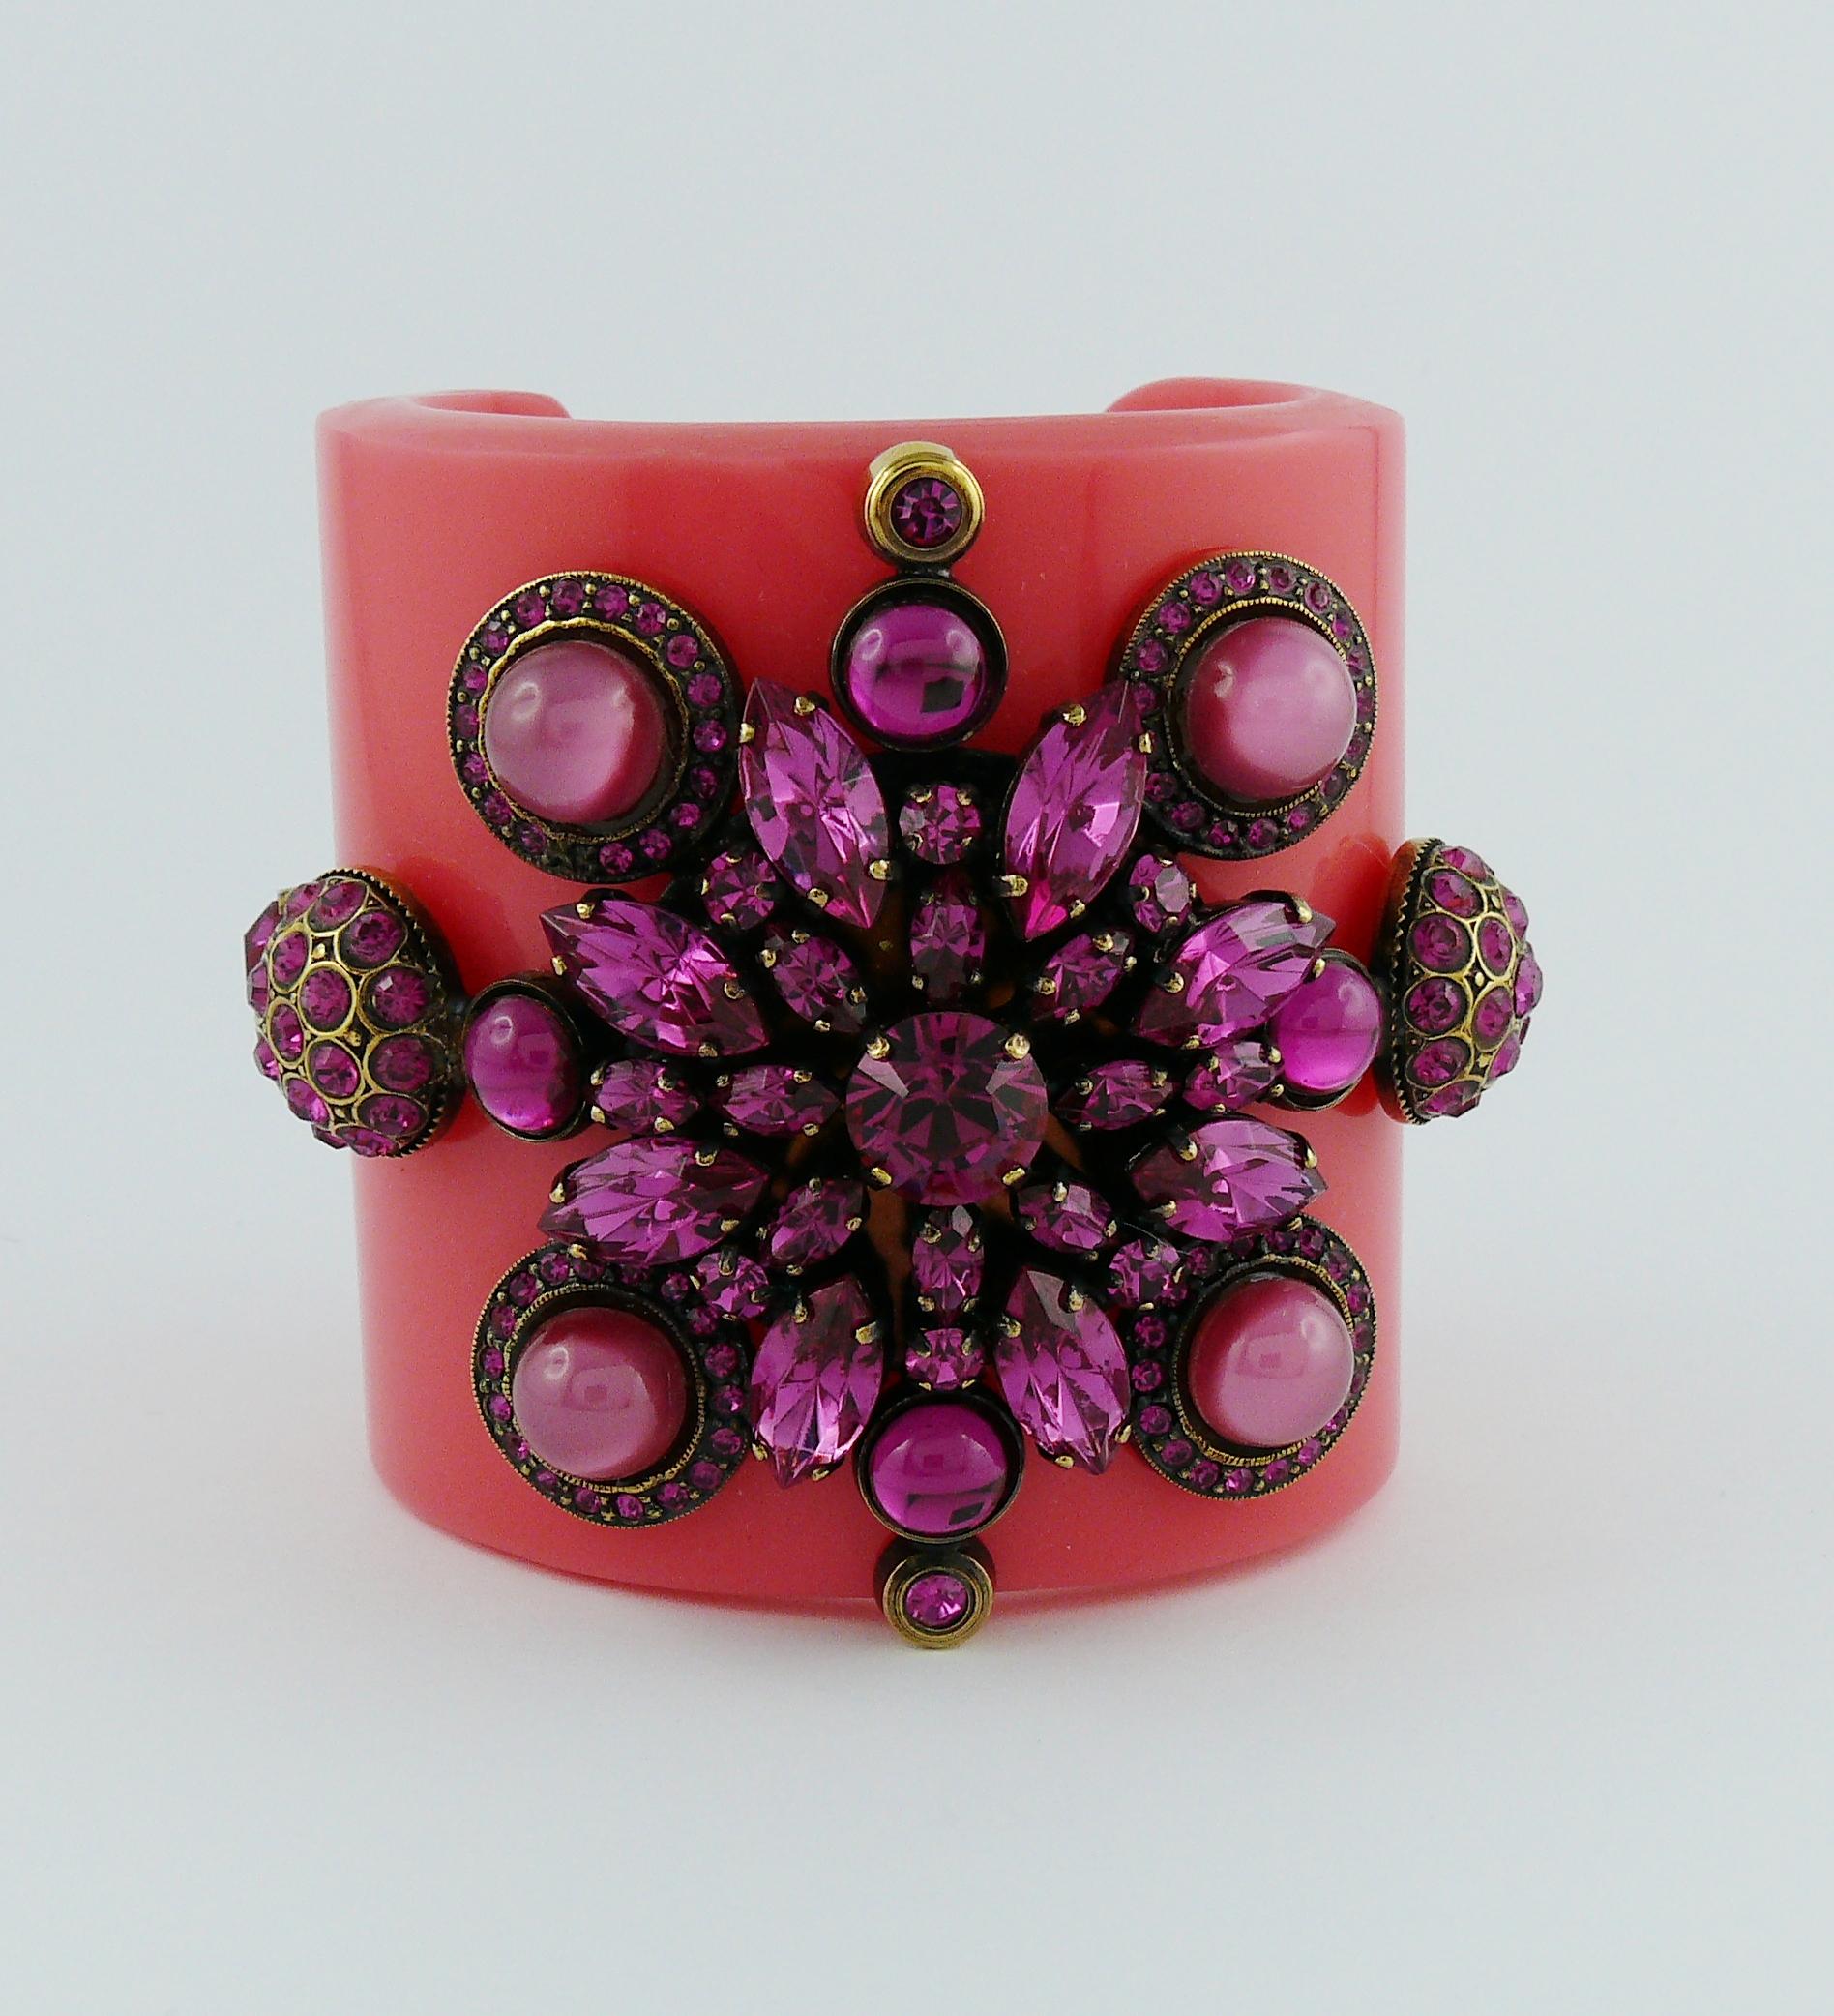 EMILIO PUCCI pink resin cuff bracelet embellished with fuchsia crystals and glass cabochons.

Spring/Summer 2012 Collection.

Signed EMILIO PUCCI 2012.
Made in Italy.

Indicative measurements : inner measurements approx. 5.4 cm (2.13 inches) x 4.6